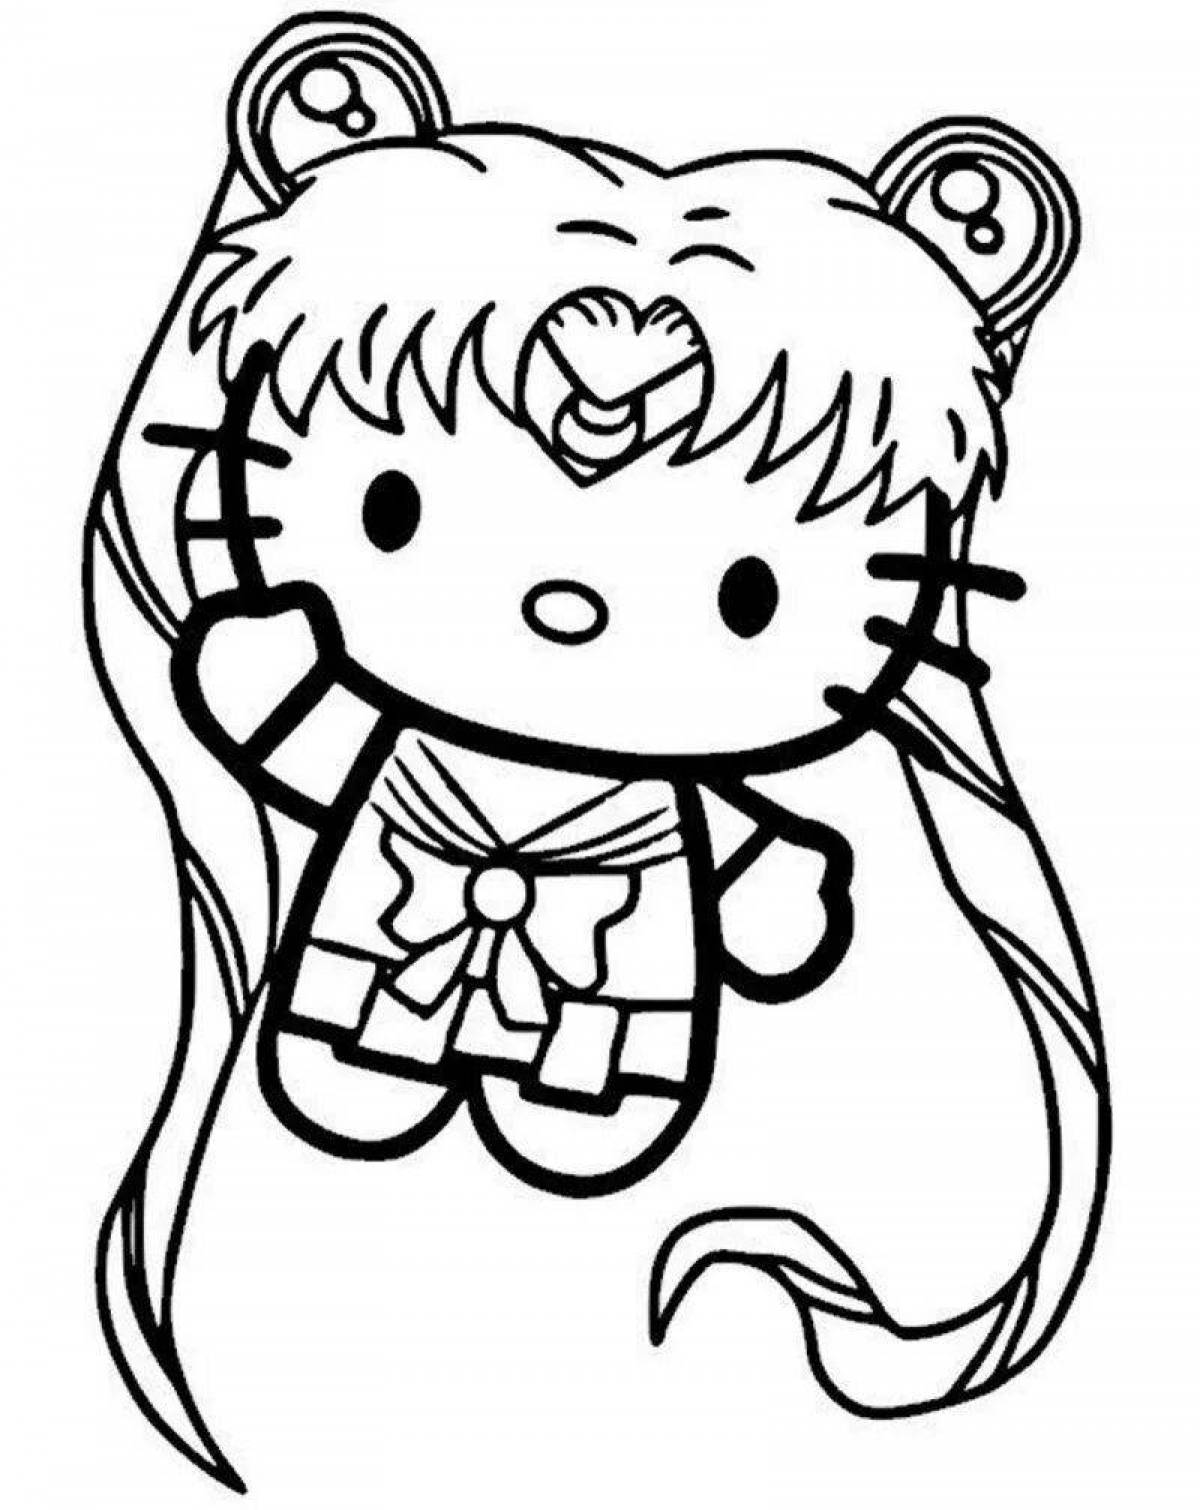 Fascinating hello kitty coloring book